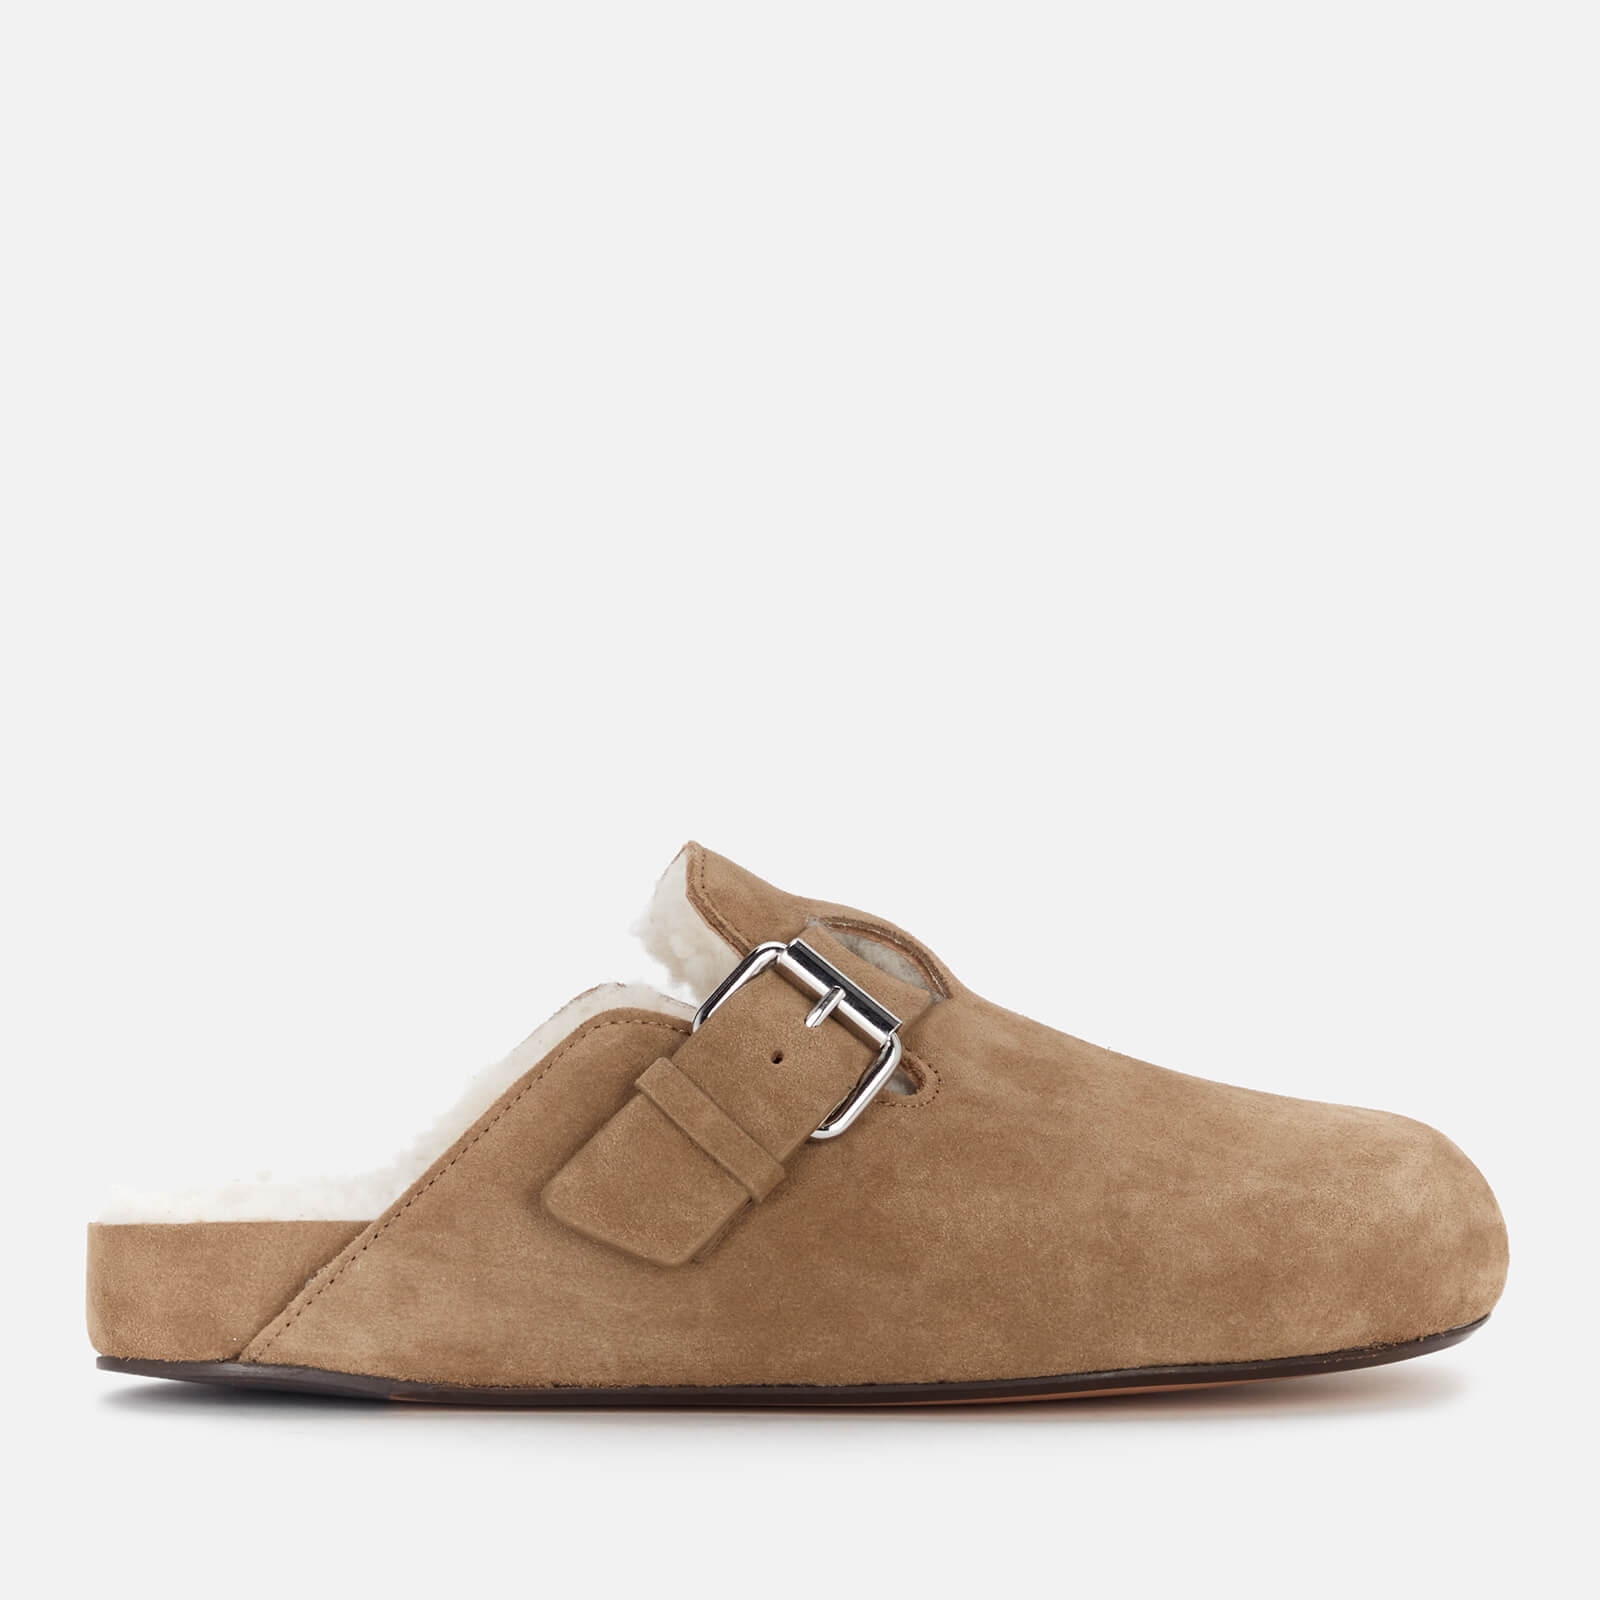 Isabel Marant Women's Mirvin Suede Mules - Taupe - UK 4